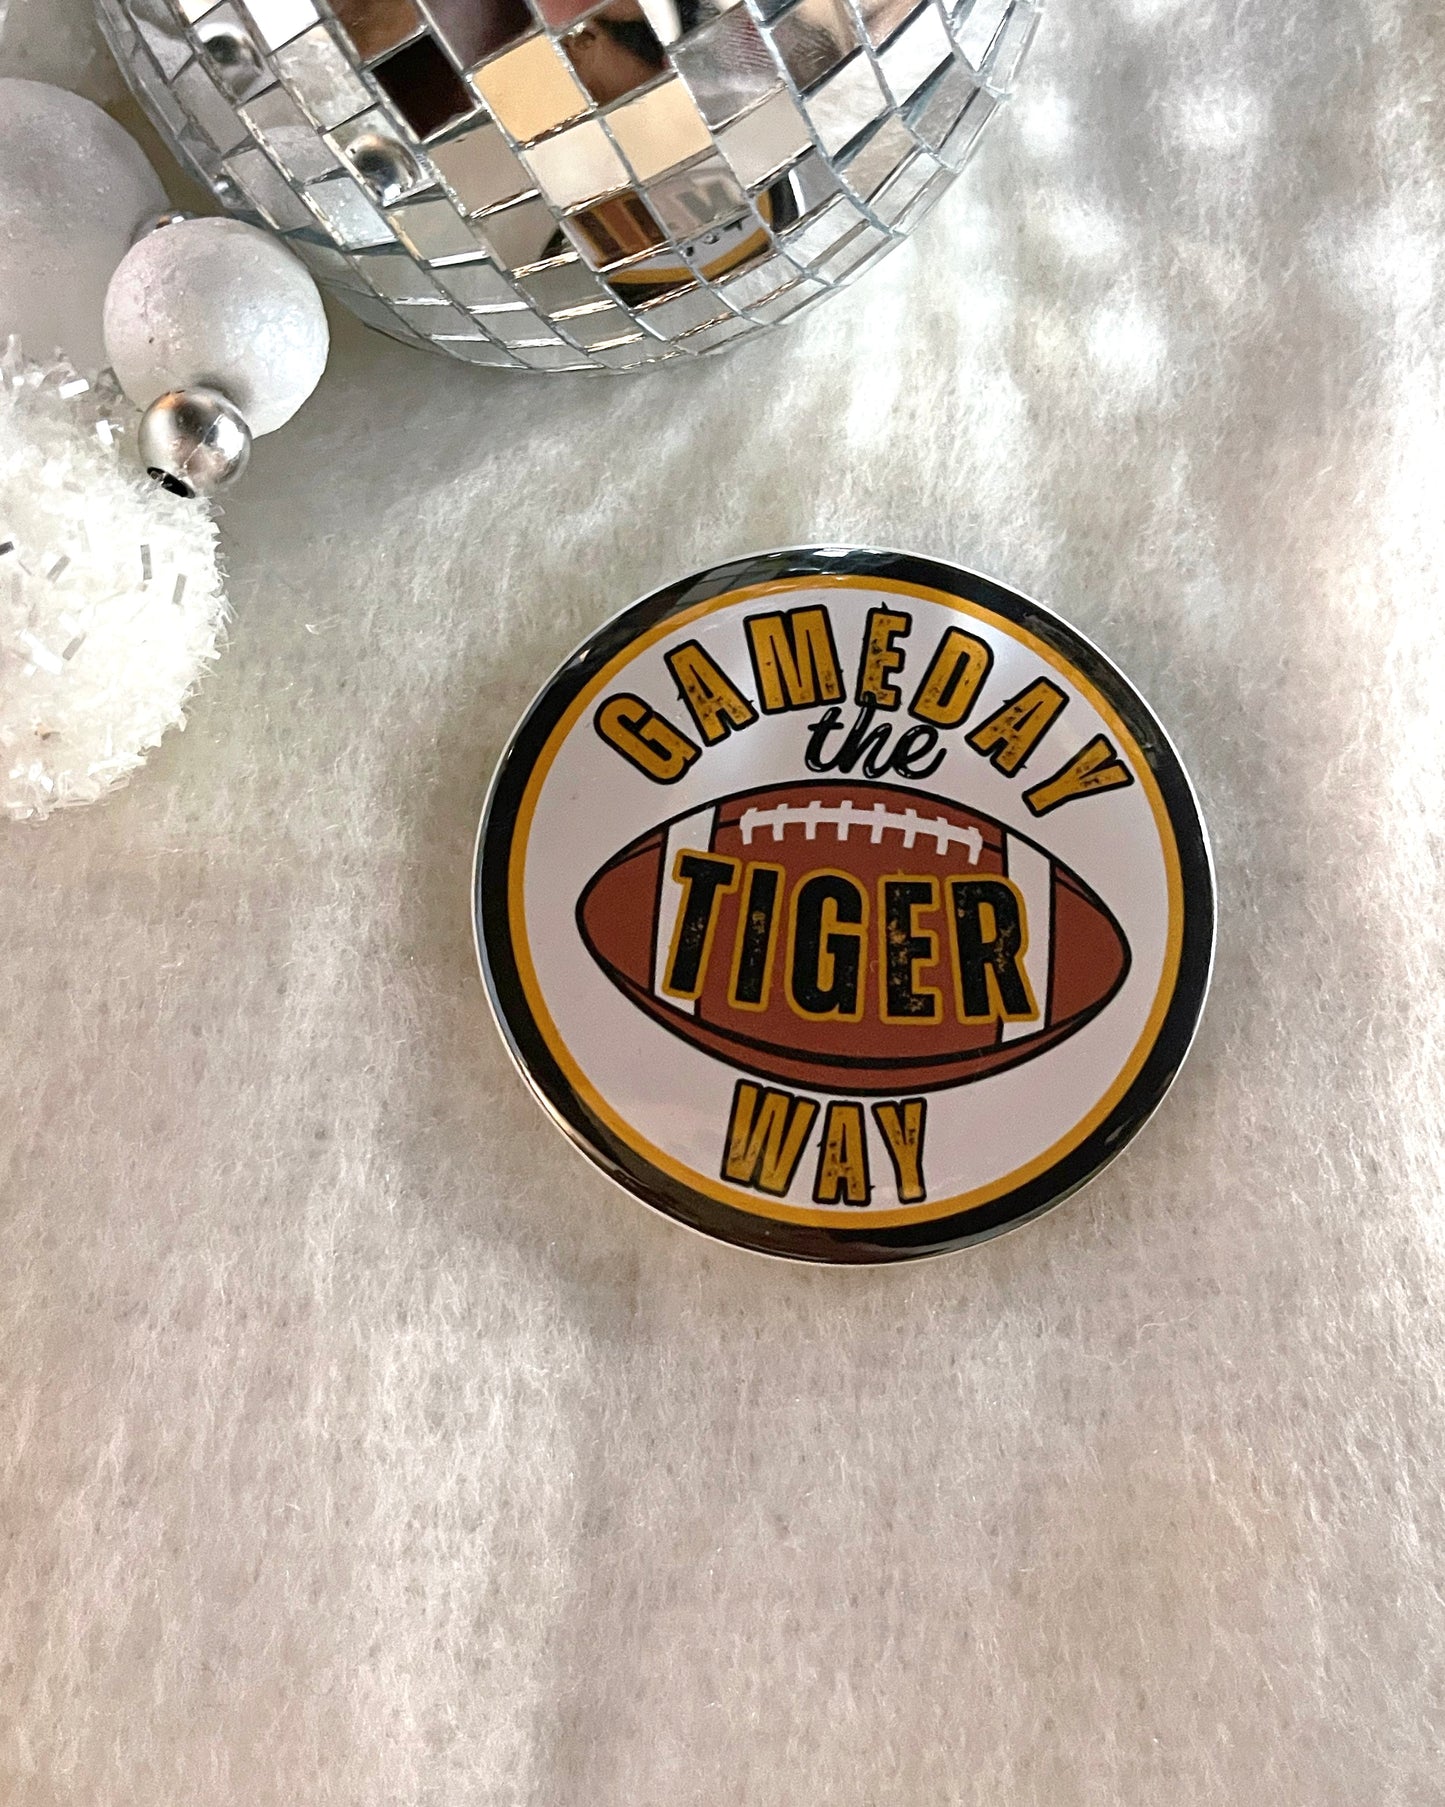 Gameday the Tiger Way Button